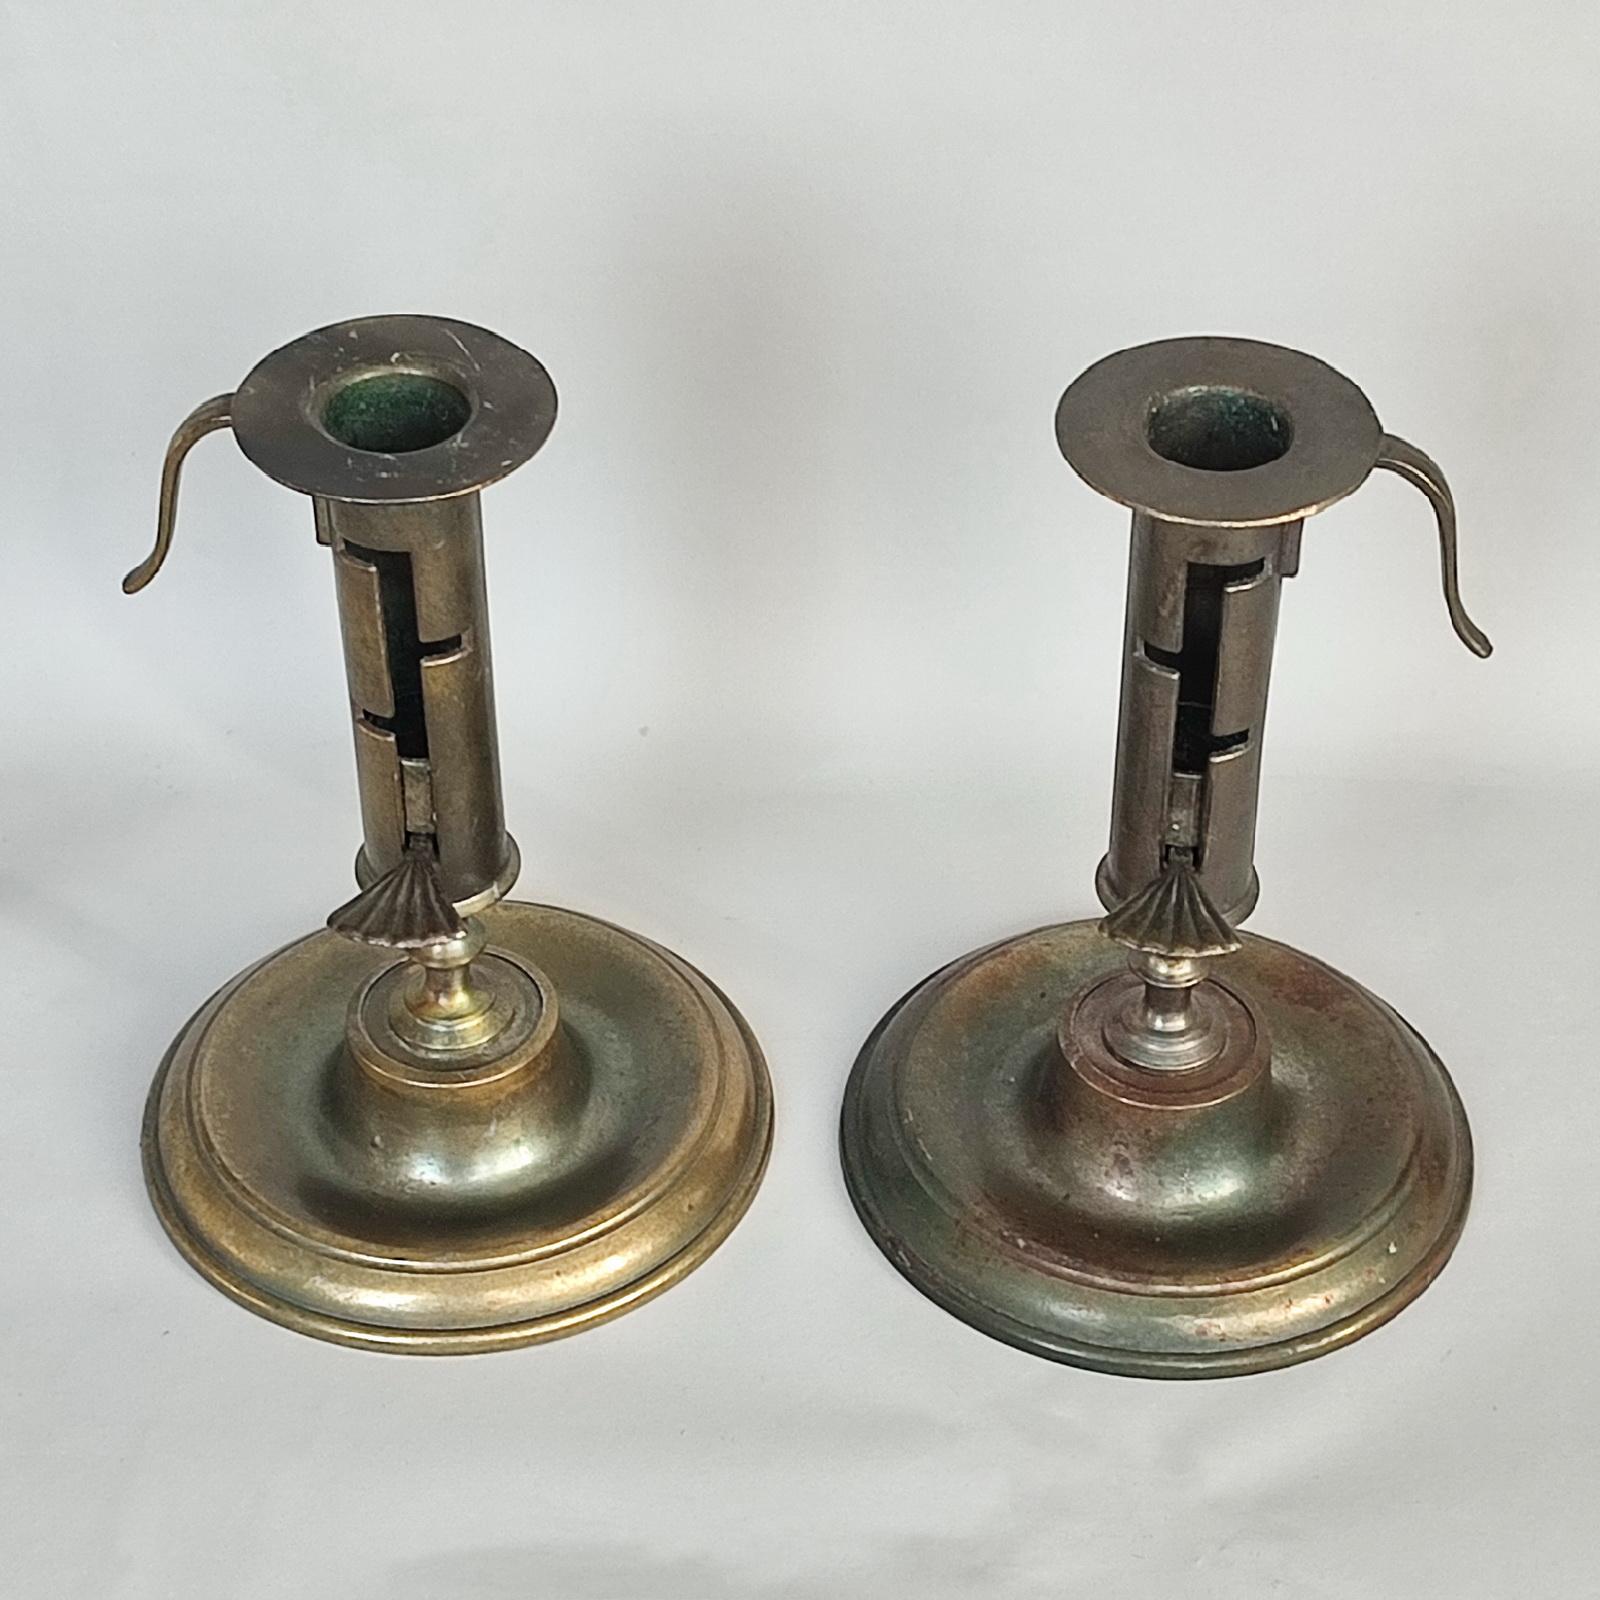 Antique Brass Adjustable Push Up Pair of Candleholders, 19th Century For Sale 3